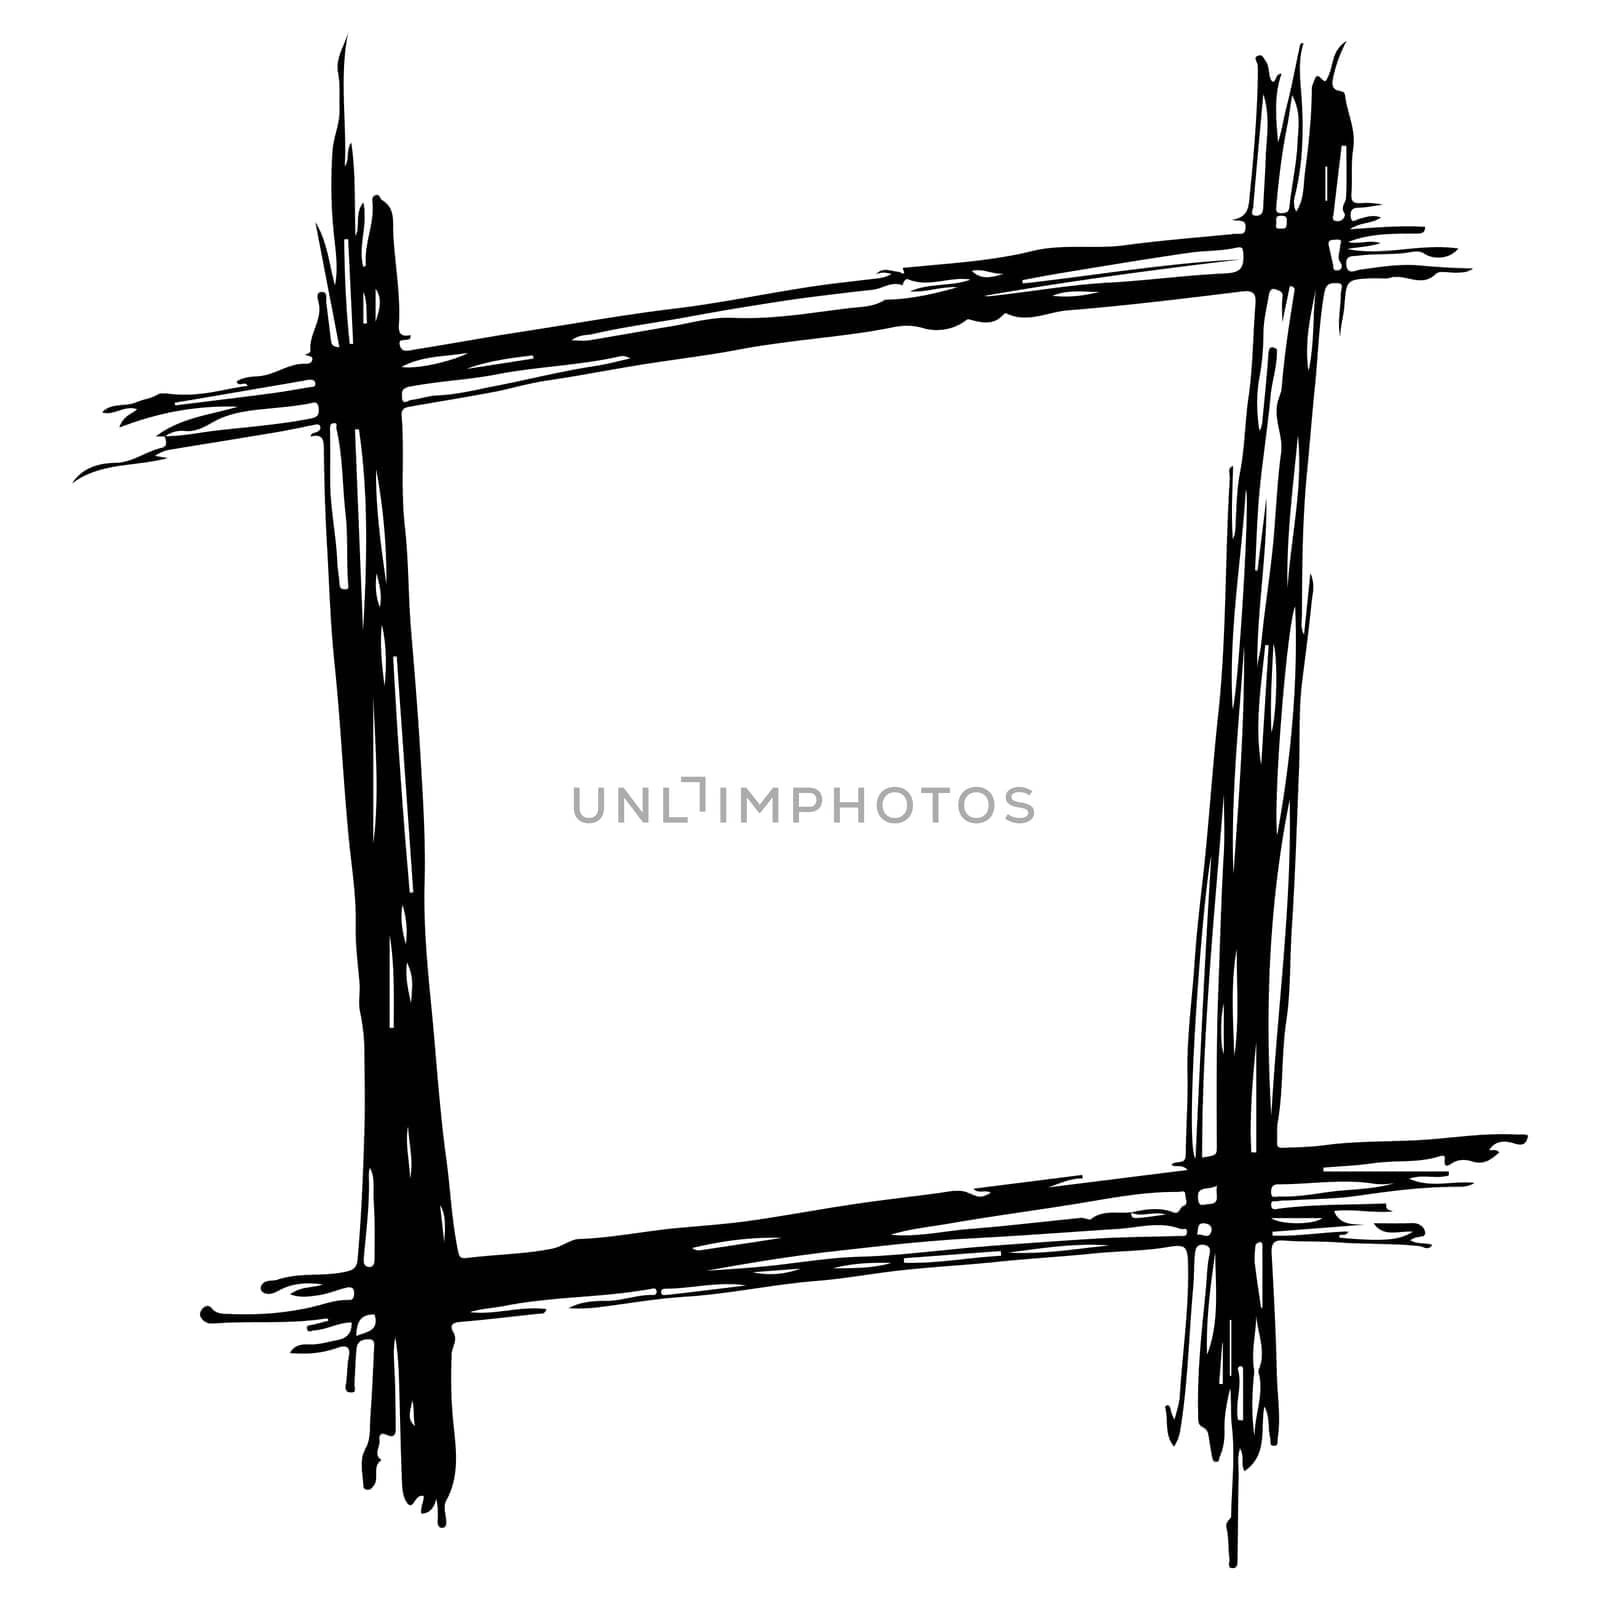 Hand Drawn Square Doodle Frame Isolated on White Background. Simple Doodle Frame with Liner Effect.